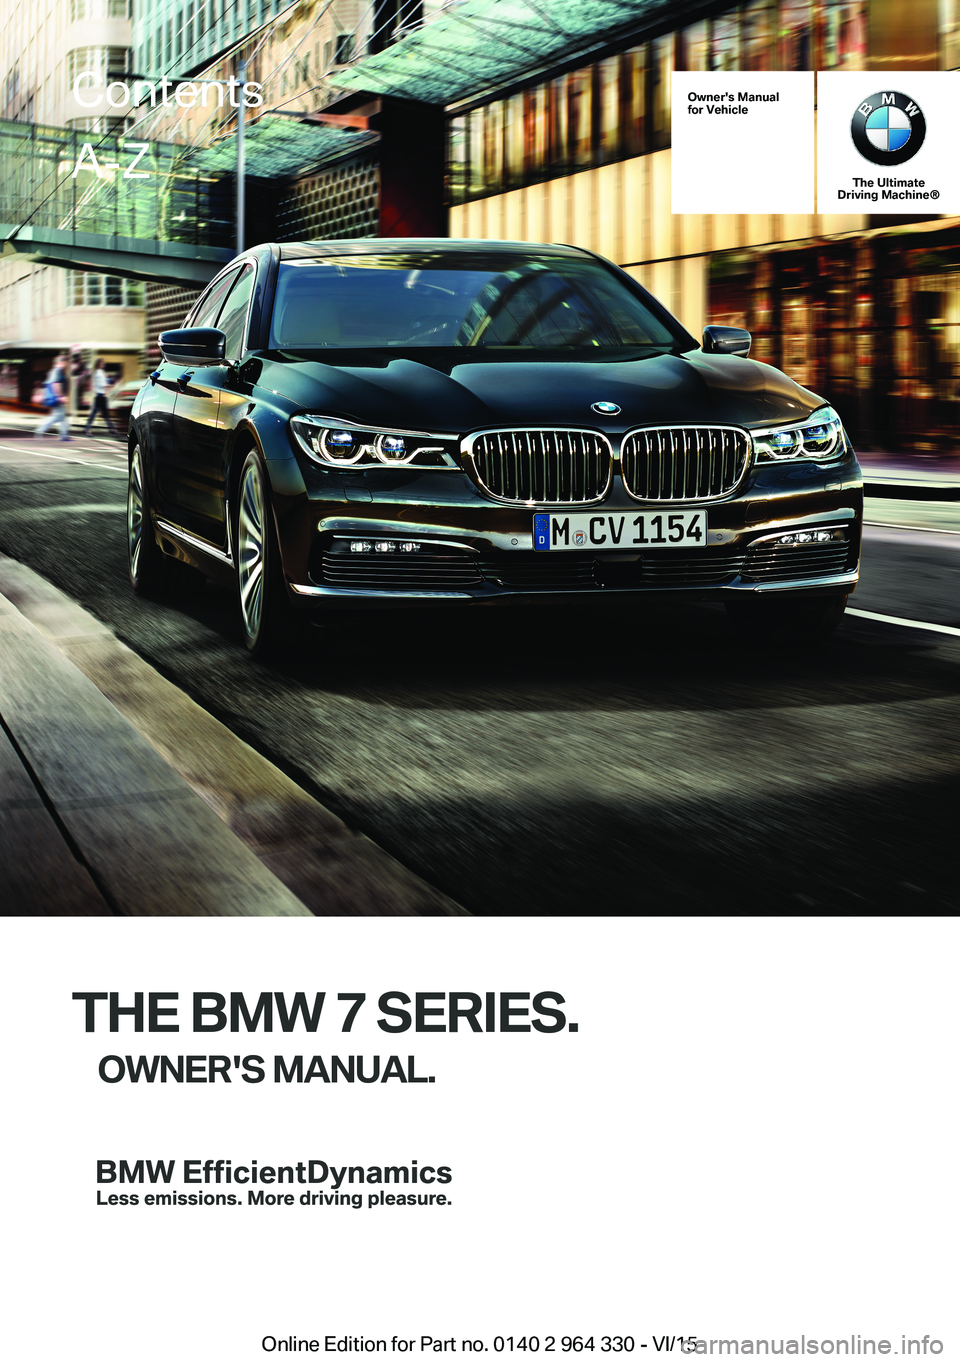 BMW 740LD XDRIVE SEDAN 2015  Owners Manual Owner's Manualfor Vehicle
The UltimateDriving Machine®
THE BMW 7 SERIES.
OWNER'S MANUAL.ContentsA-Z
Online Edition for Part no. 0140 2 964 330 - VI/15   